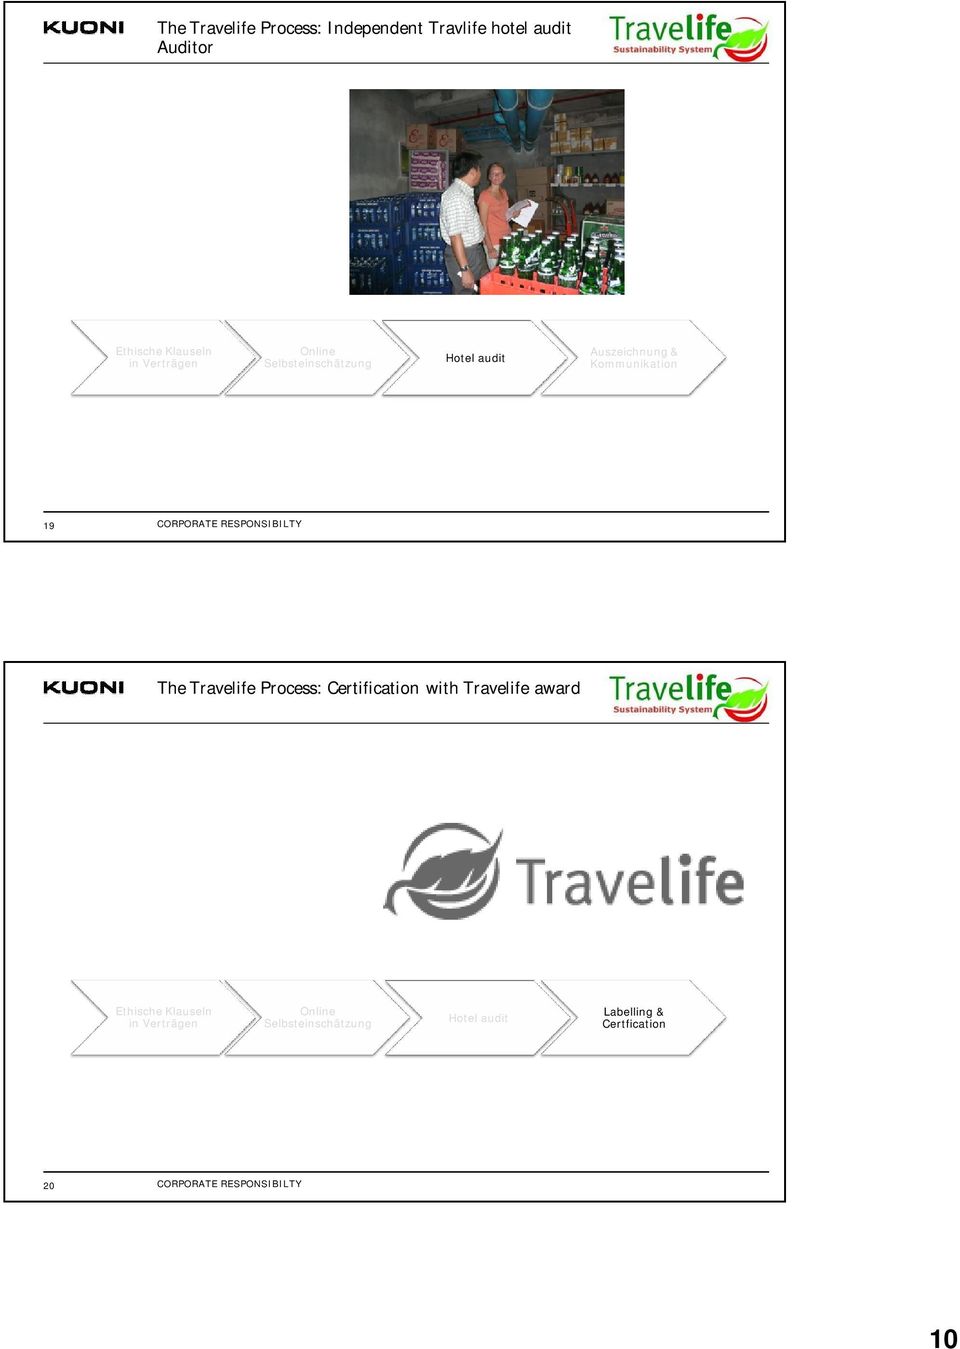 Kommunikation The Travelife Process: Certification with Travelife award Ethische